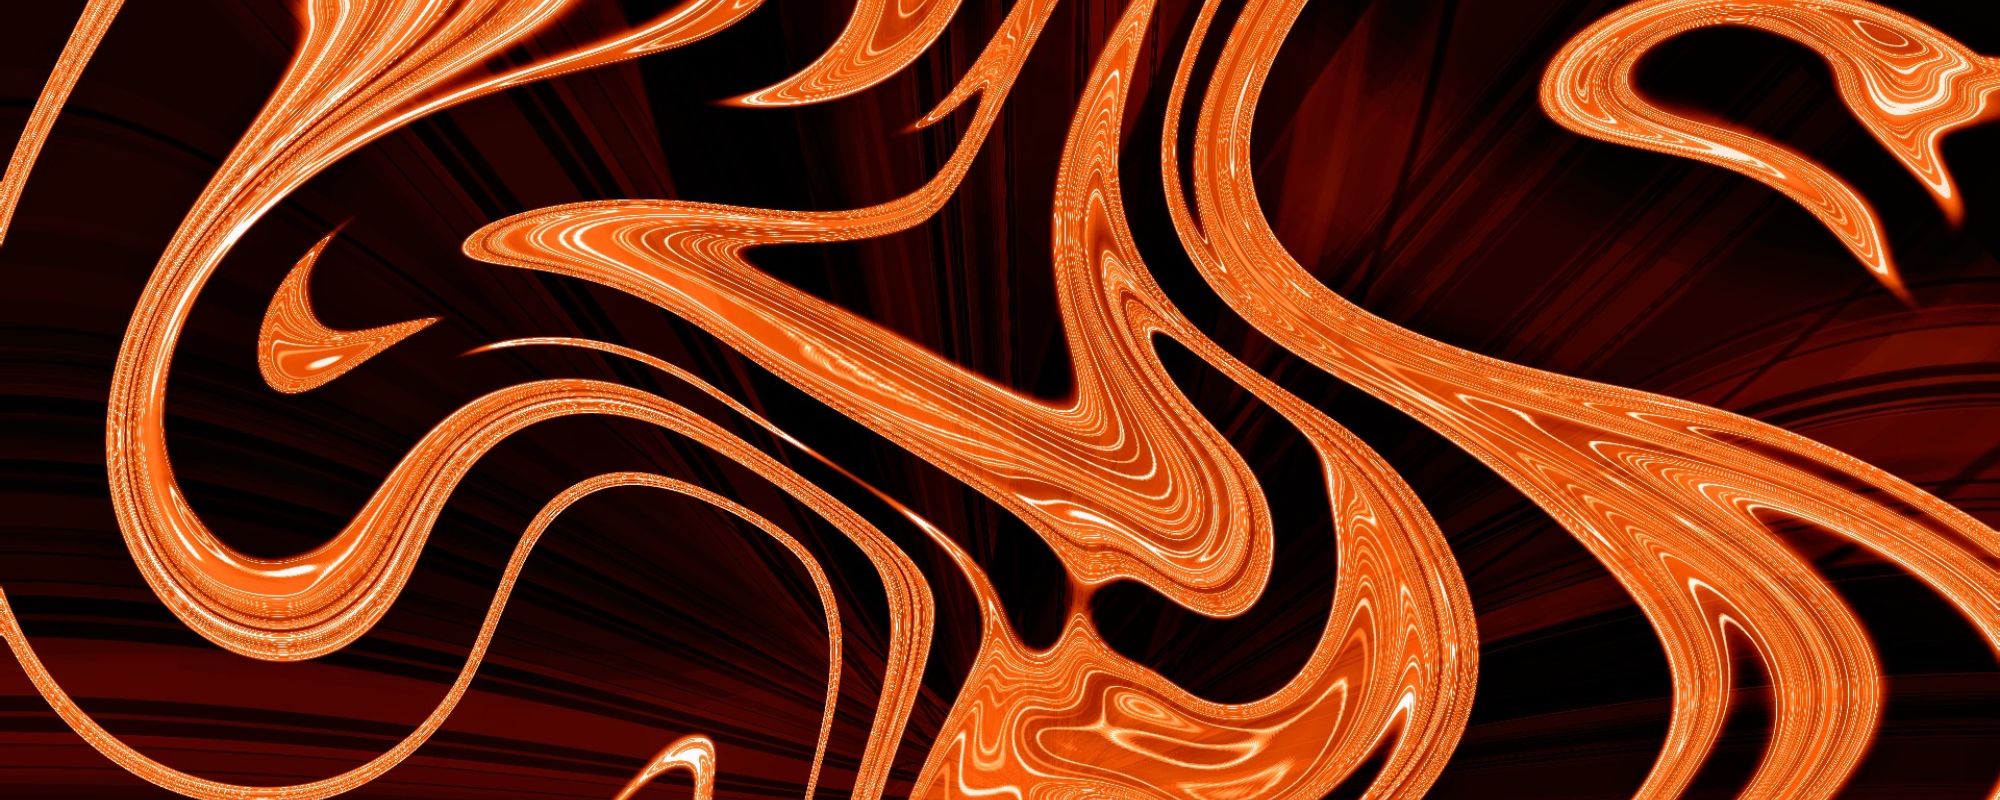 image of orange and brown marble pattern